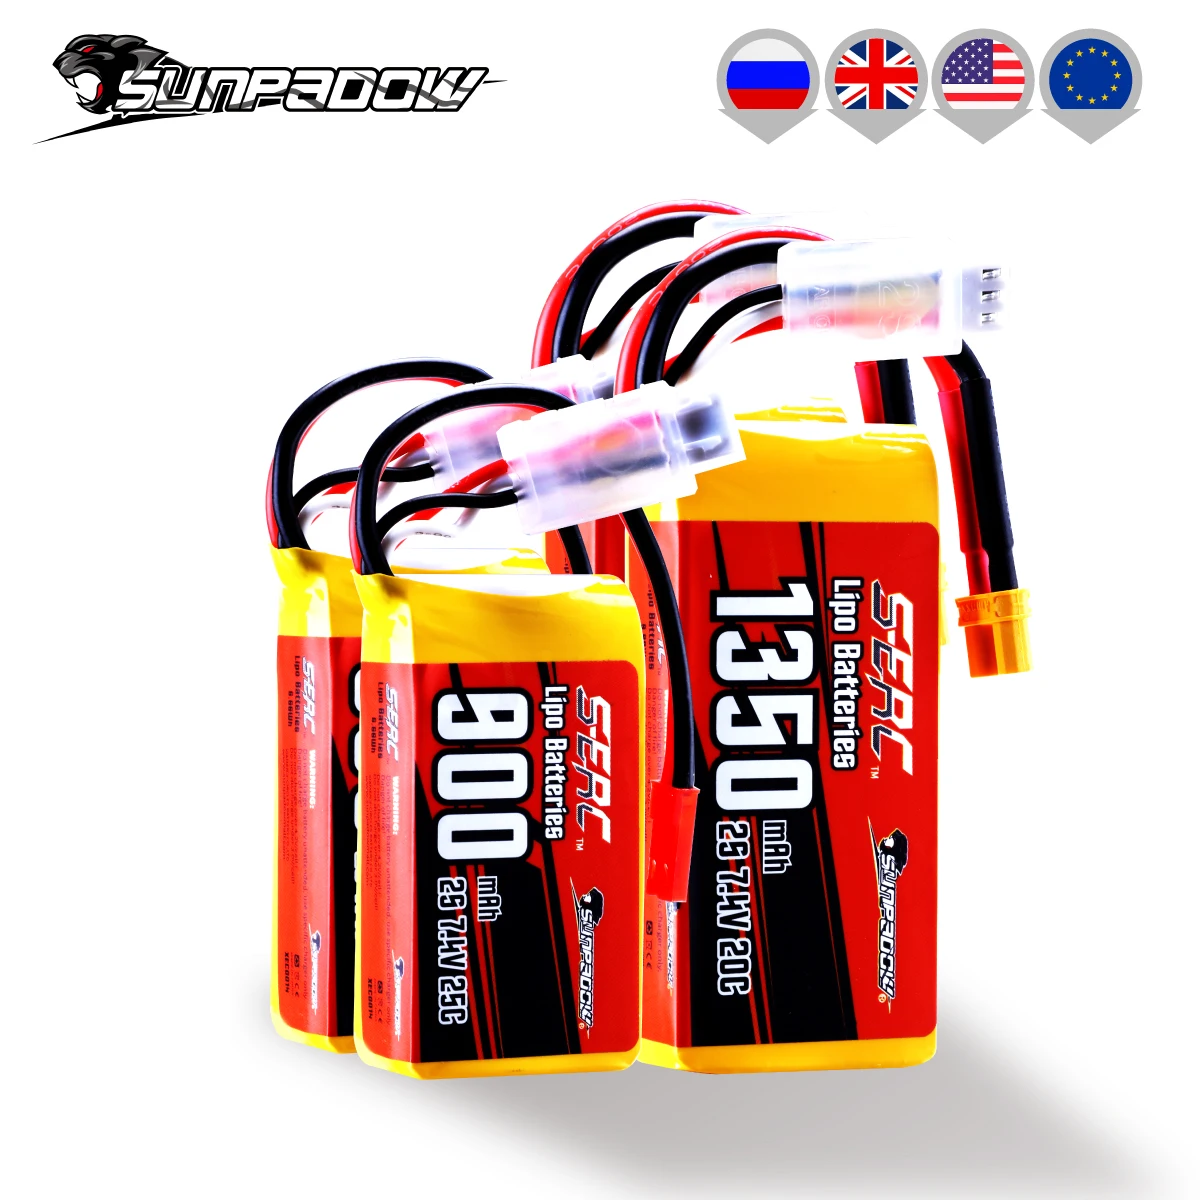 2packs Sunpadow 2S 7.4V Lipo Battery 900mAh 1350mAh 20C 25C Soft Pack with JST XT30 Plug for RC Airplane Quadcopter Helicopter